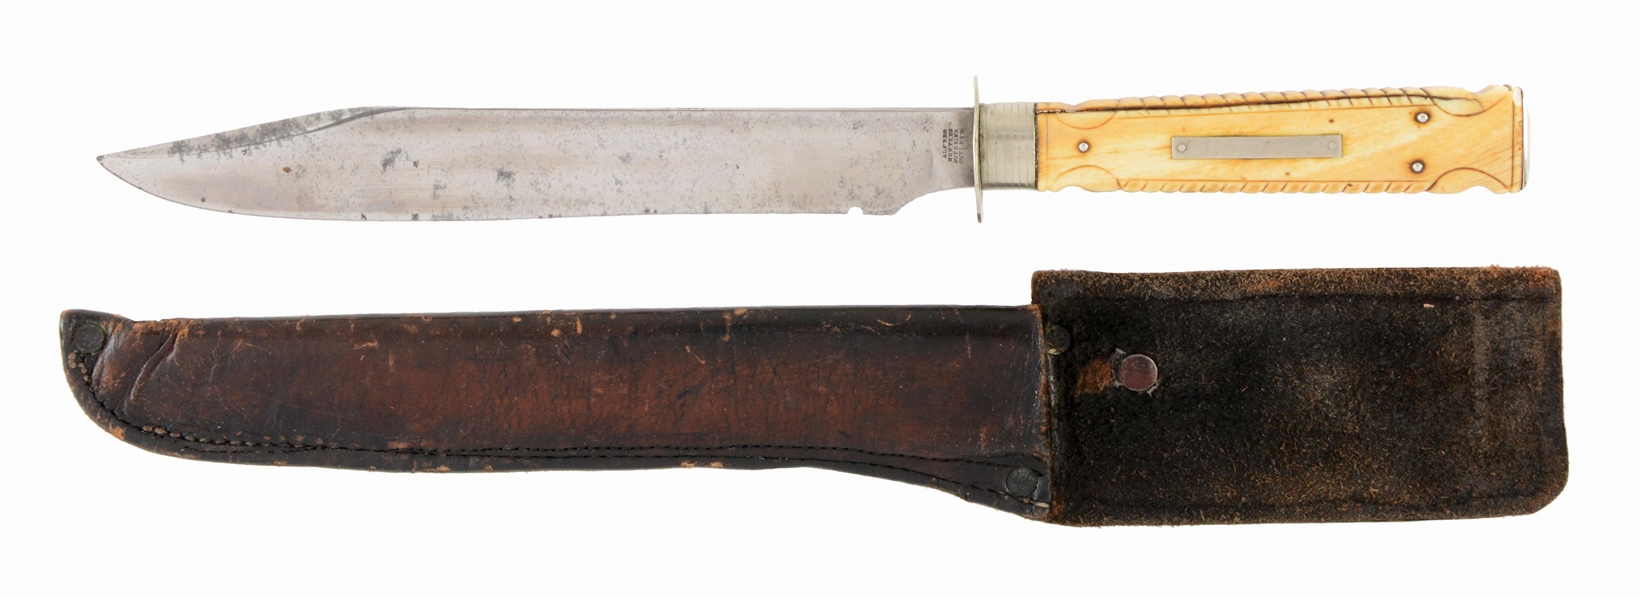 ALFRED HUNTER BOWIE KNIFE WITH CARVED IVORY HANDLE.